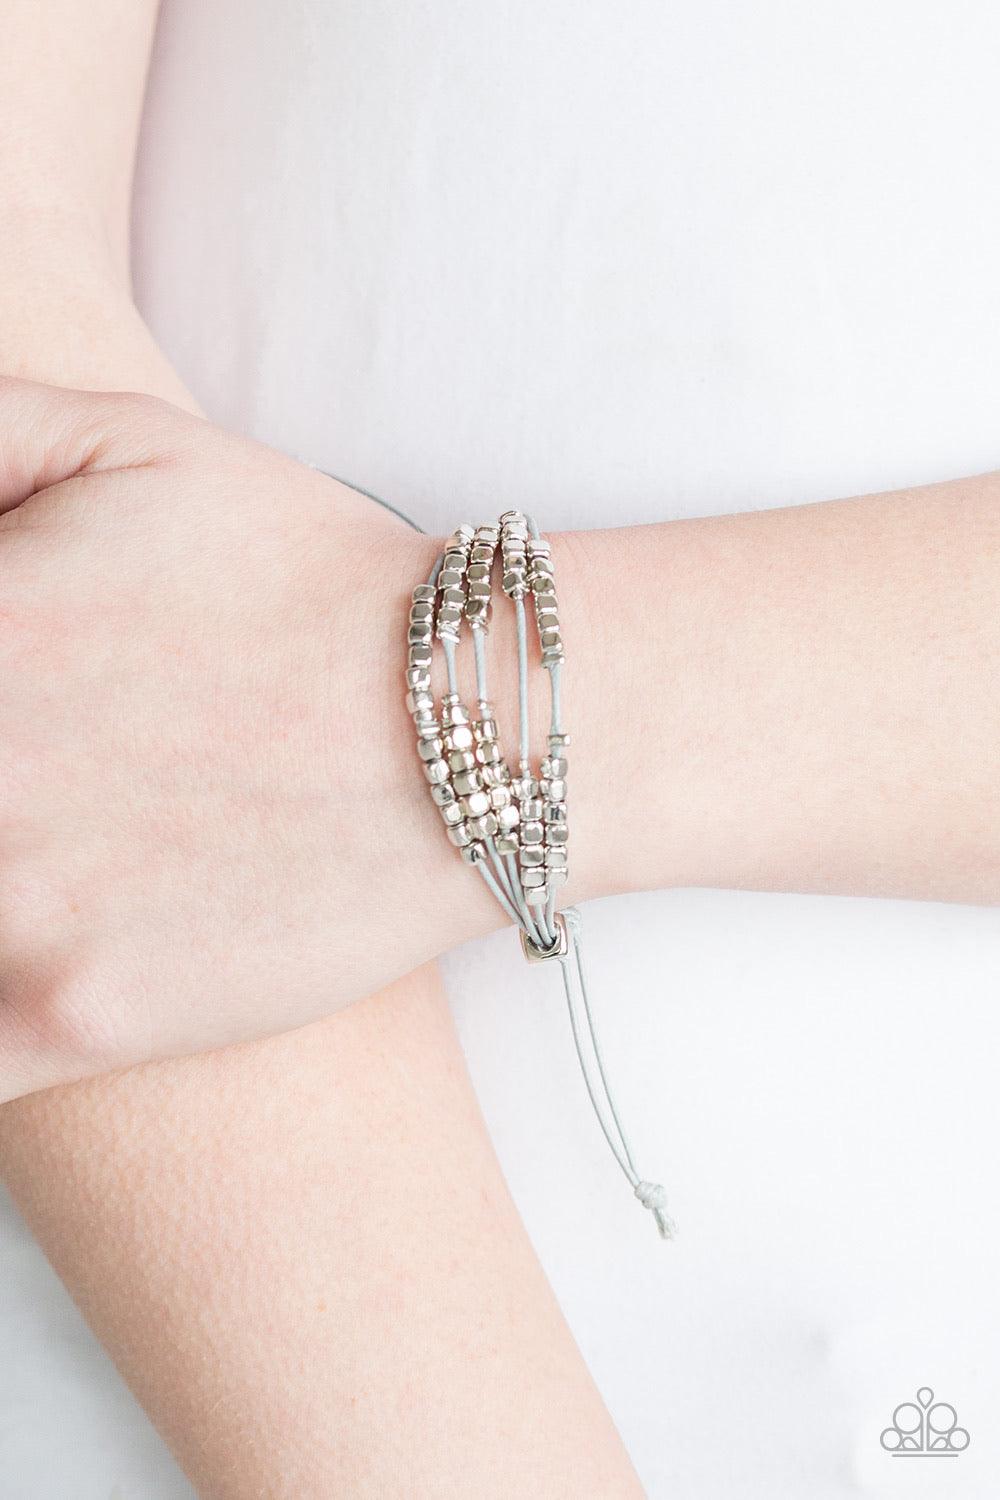 Paparazzi Accessories Modern Minimalism - Silver A collection of dainty silver beads and glistening silver cubes are threaded along strands of shiny gray cording around the wrist for a minimalist inspired look. Features an adjustable sliding knot clos Jew